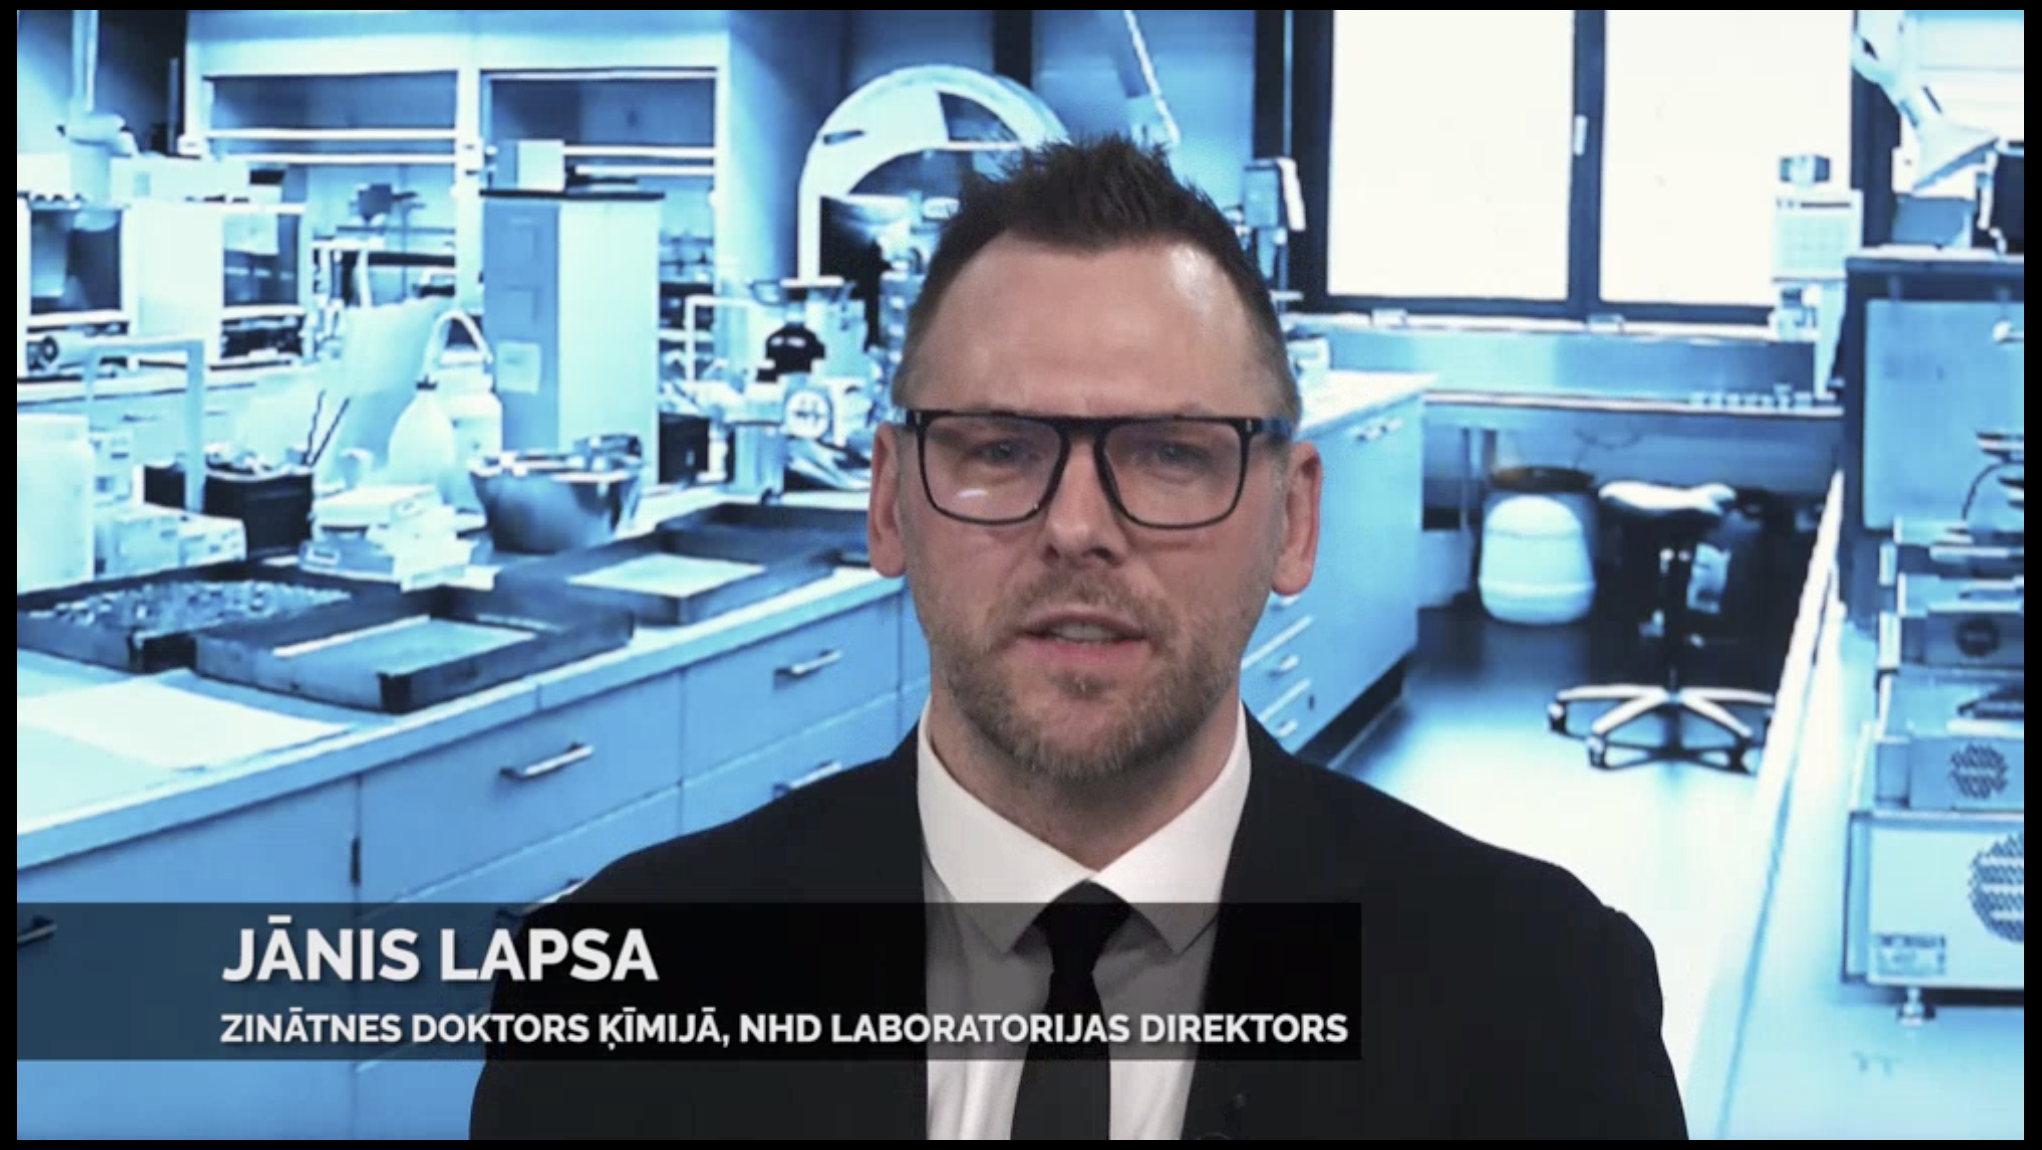 A still frame of a video with a man wearing glasses, a tie, shirt and suit jacket with the title Janis Lapsa Zinatnes doktors kimija, NHD Laboratorijas Direktors in the lower third of the screen